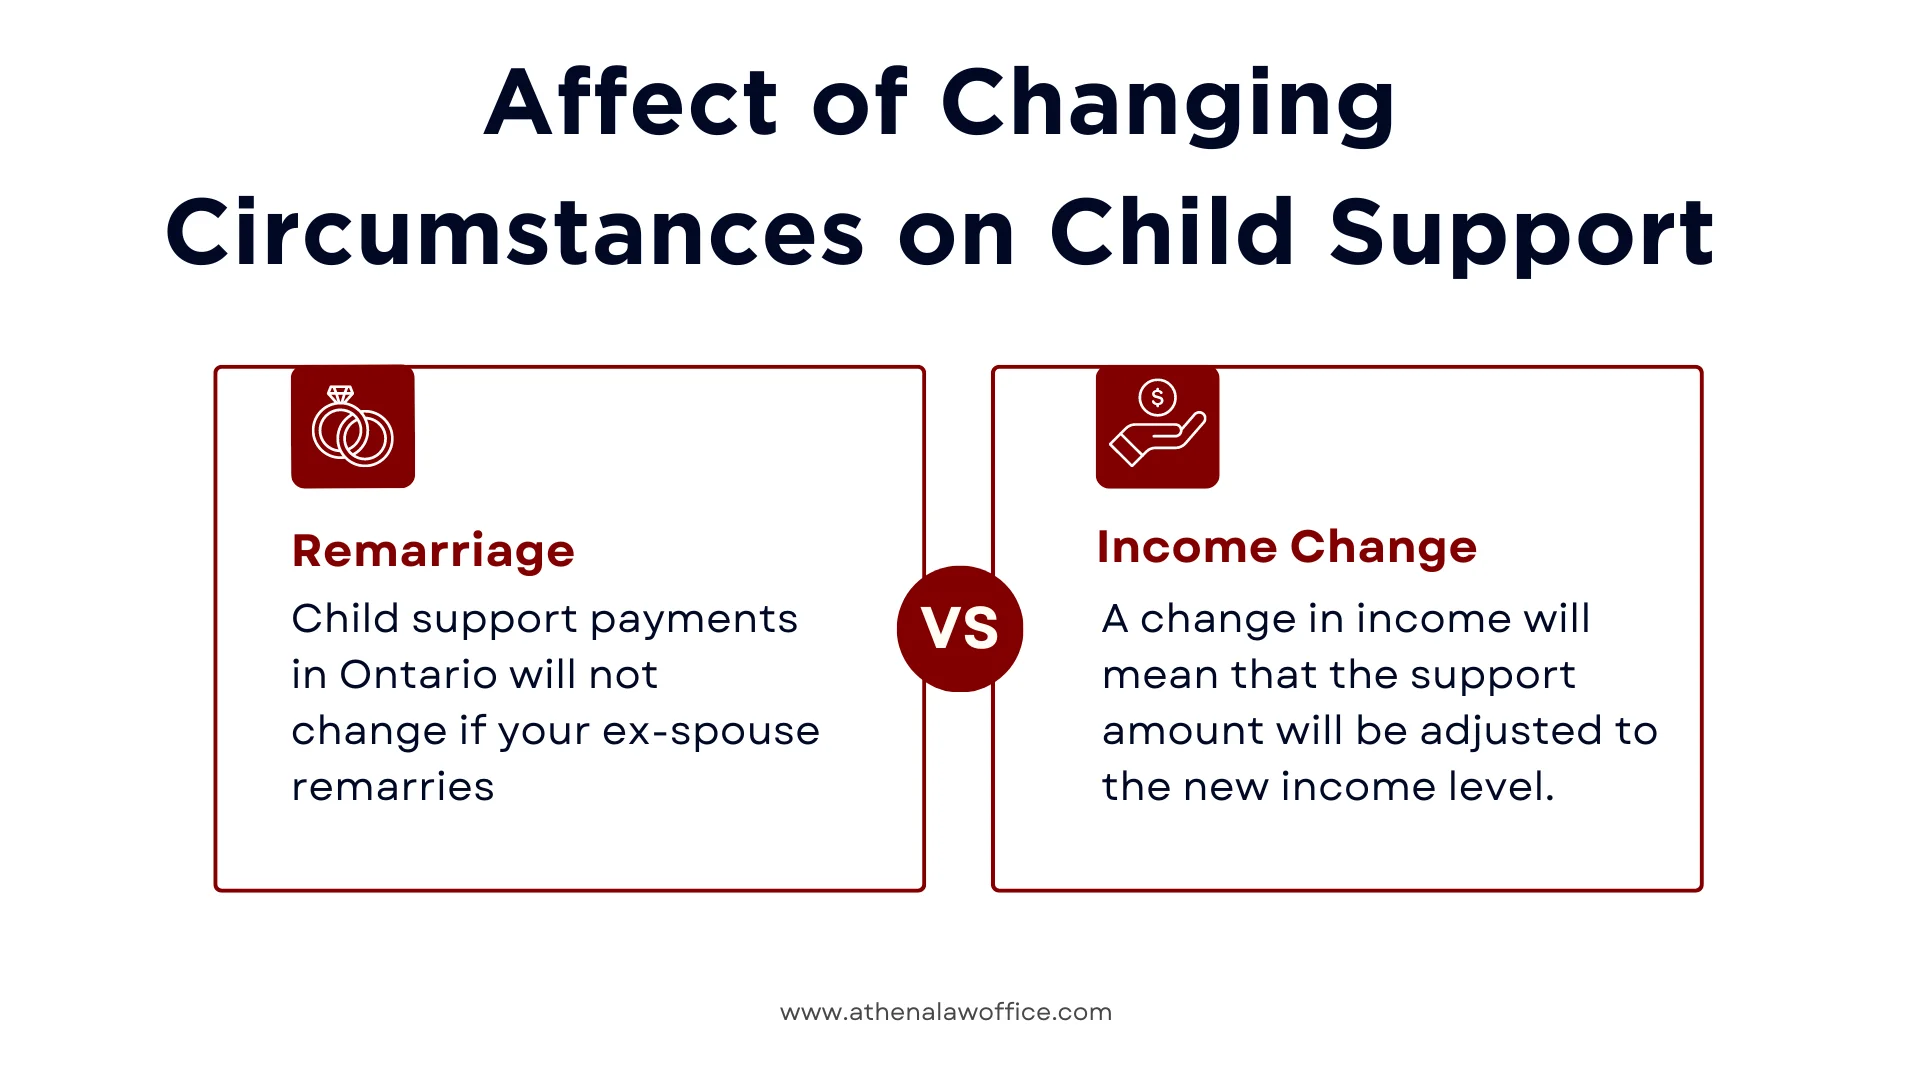 An infographic on how changing circumstances affect child support payments in Ontario